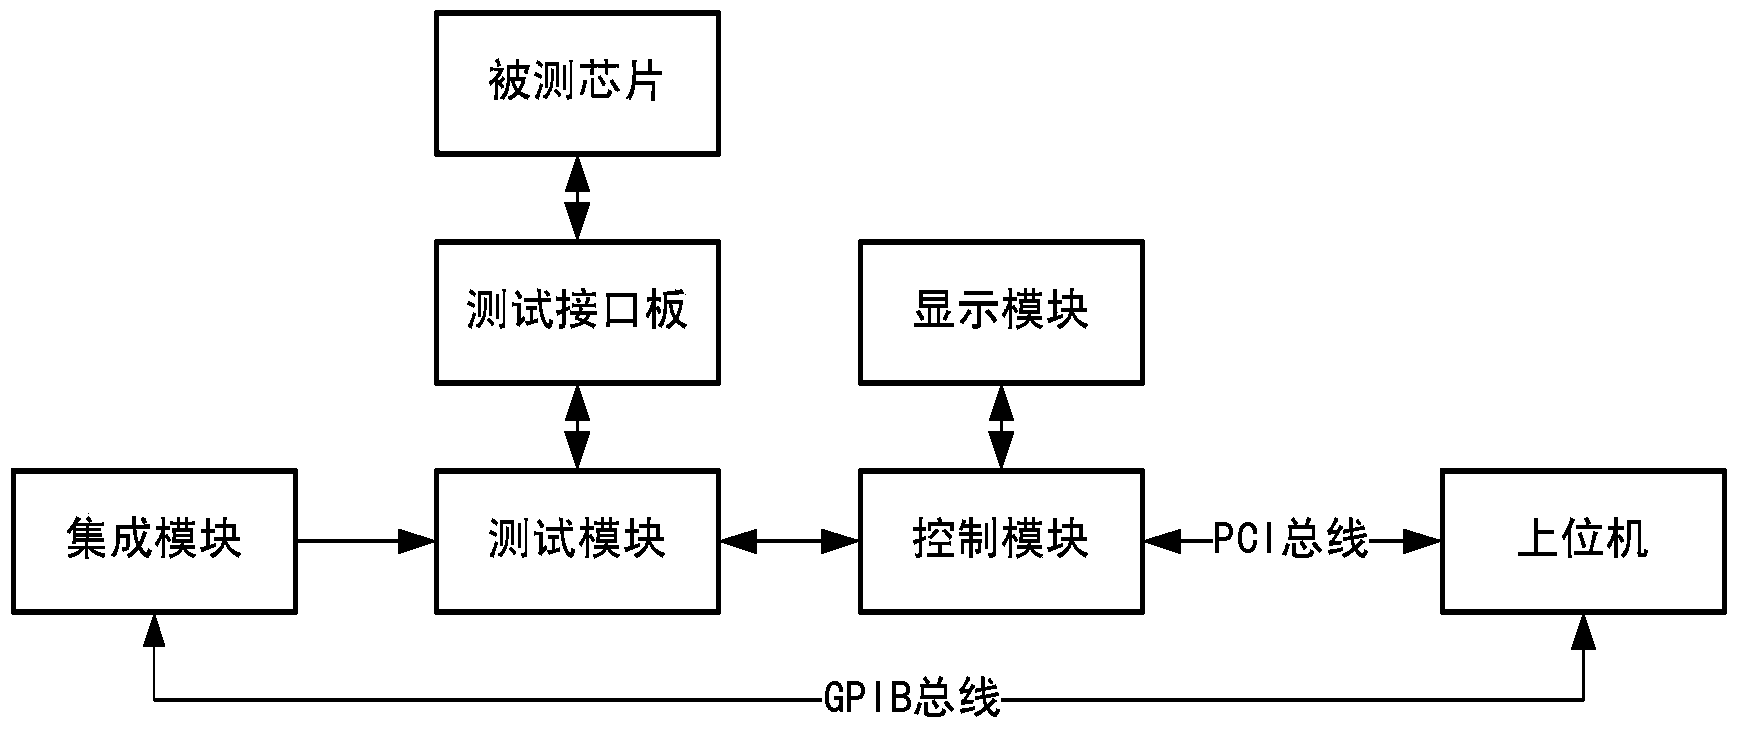 Automatic test system for digital integrated circuit